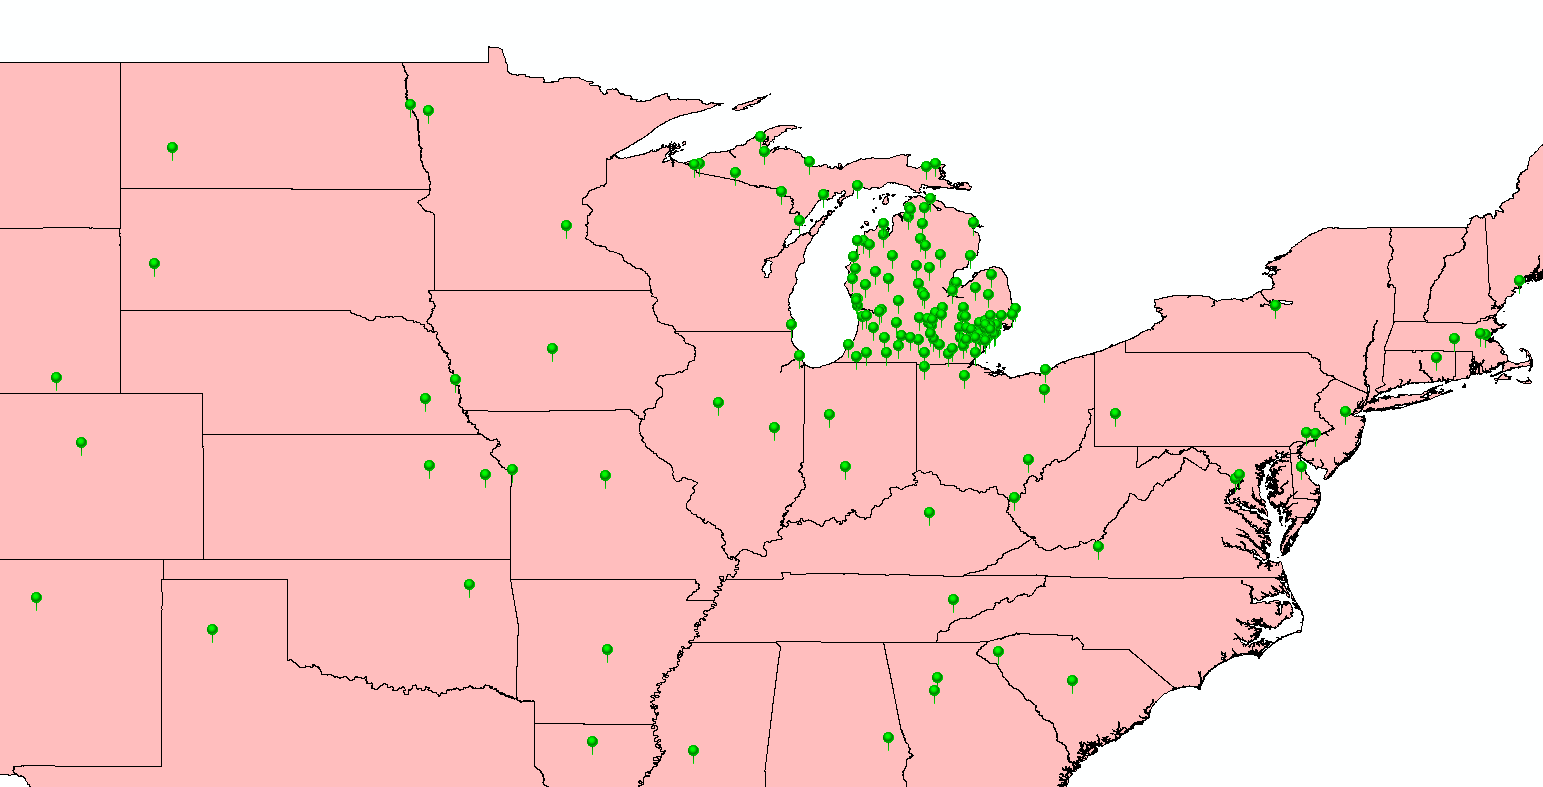 Map of the United States with pins densely clustered in Michigan and 1-2 pins in most other states